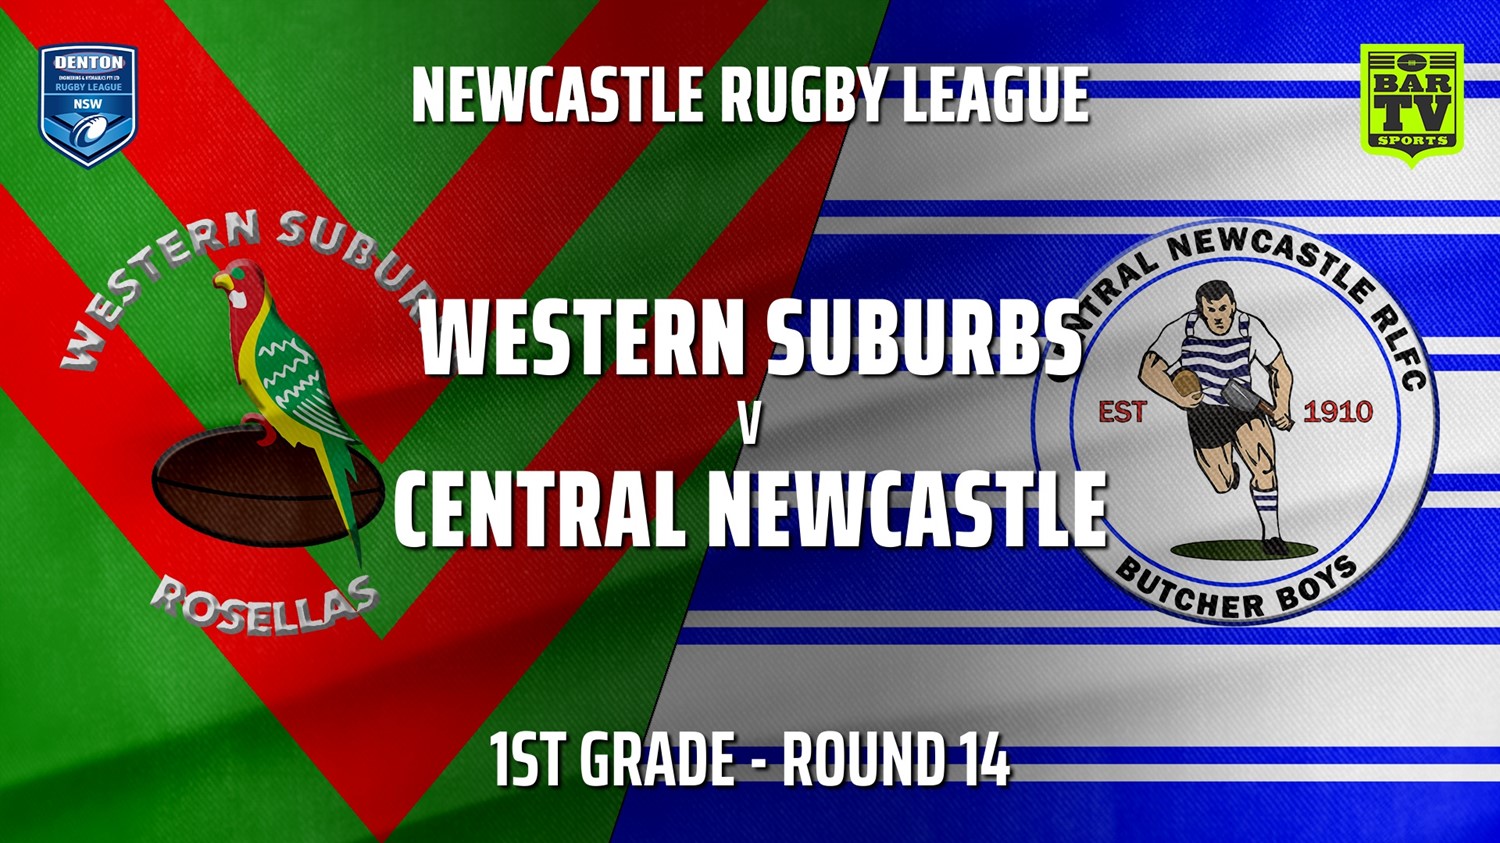 210711-Newcastle Round 14 - 1st Grade - Western Suburbs Rosellas v Central Newcastle Minigame Slate Image